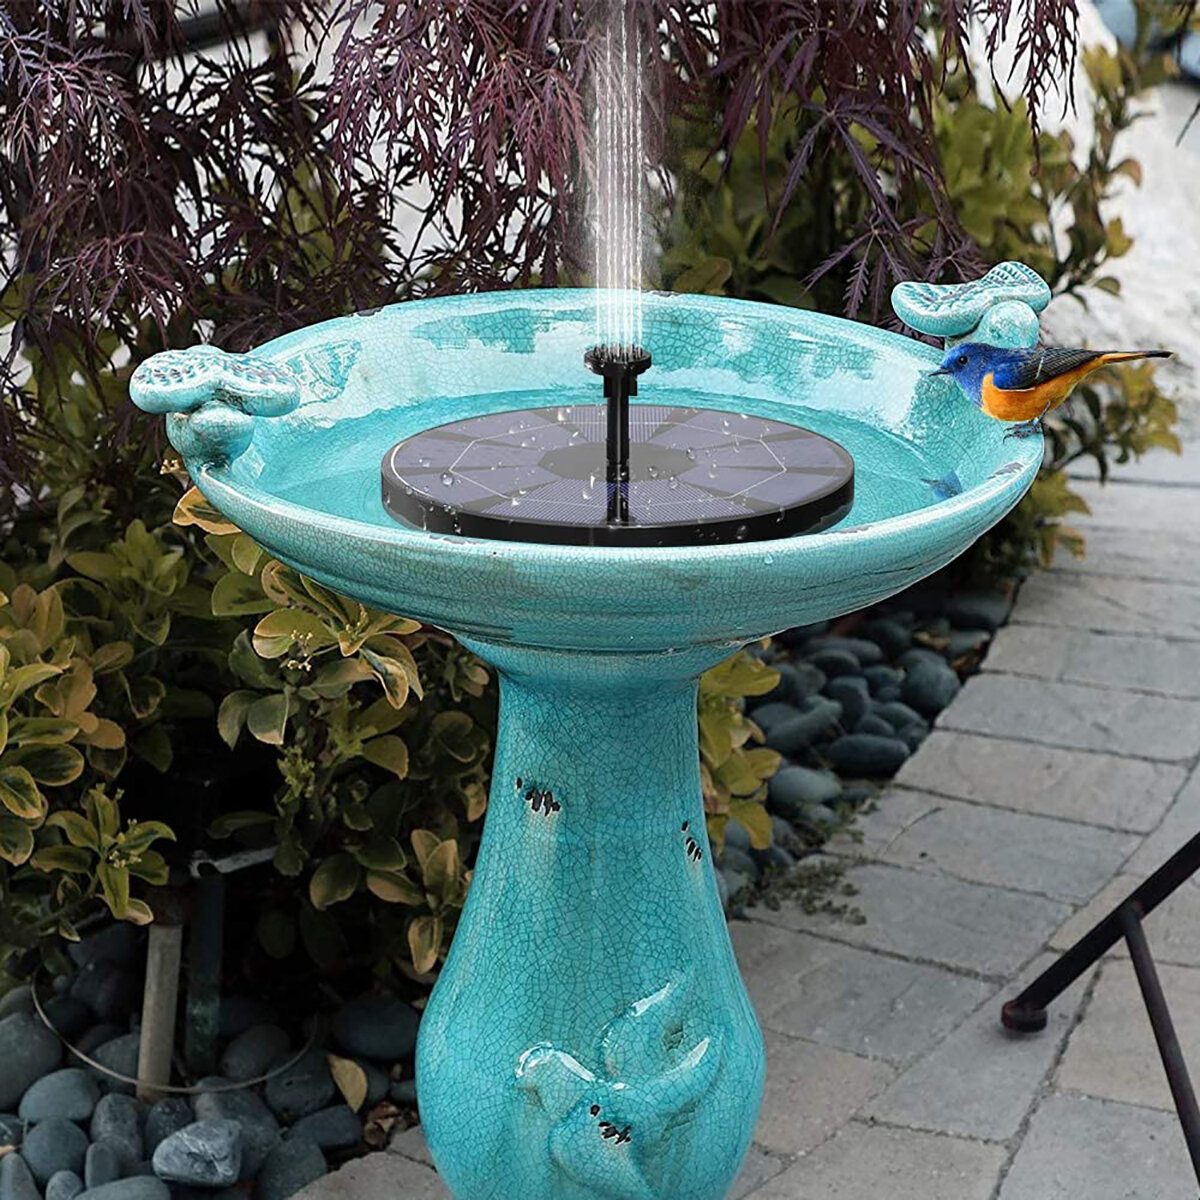 8-in-1 Solar Bird Water Fountain Set, 3.5W Circle Solar Floating Pump Built-in 1600mAH Battery for W